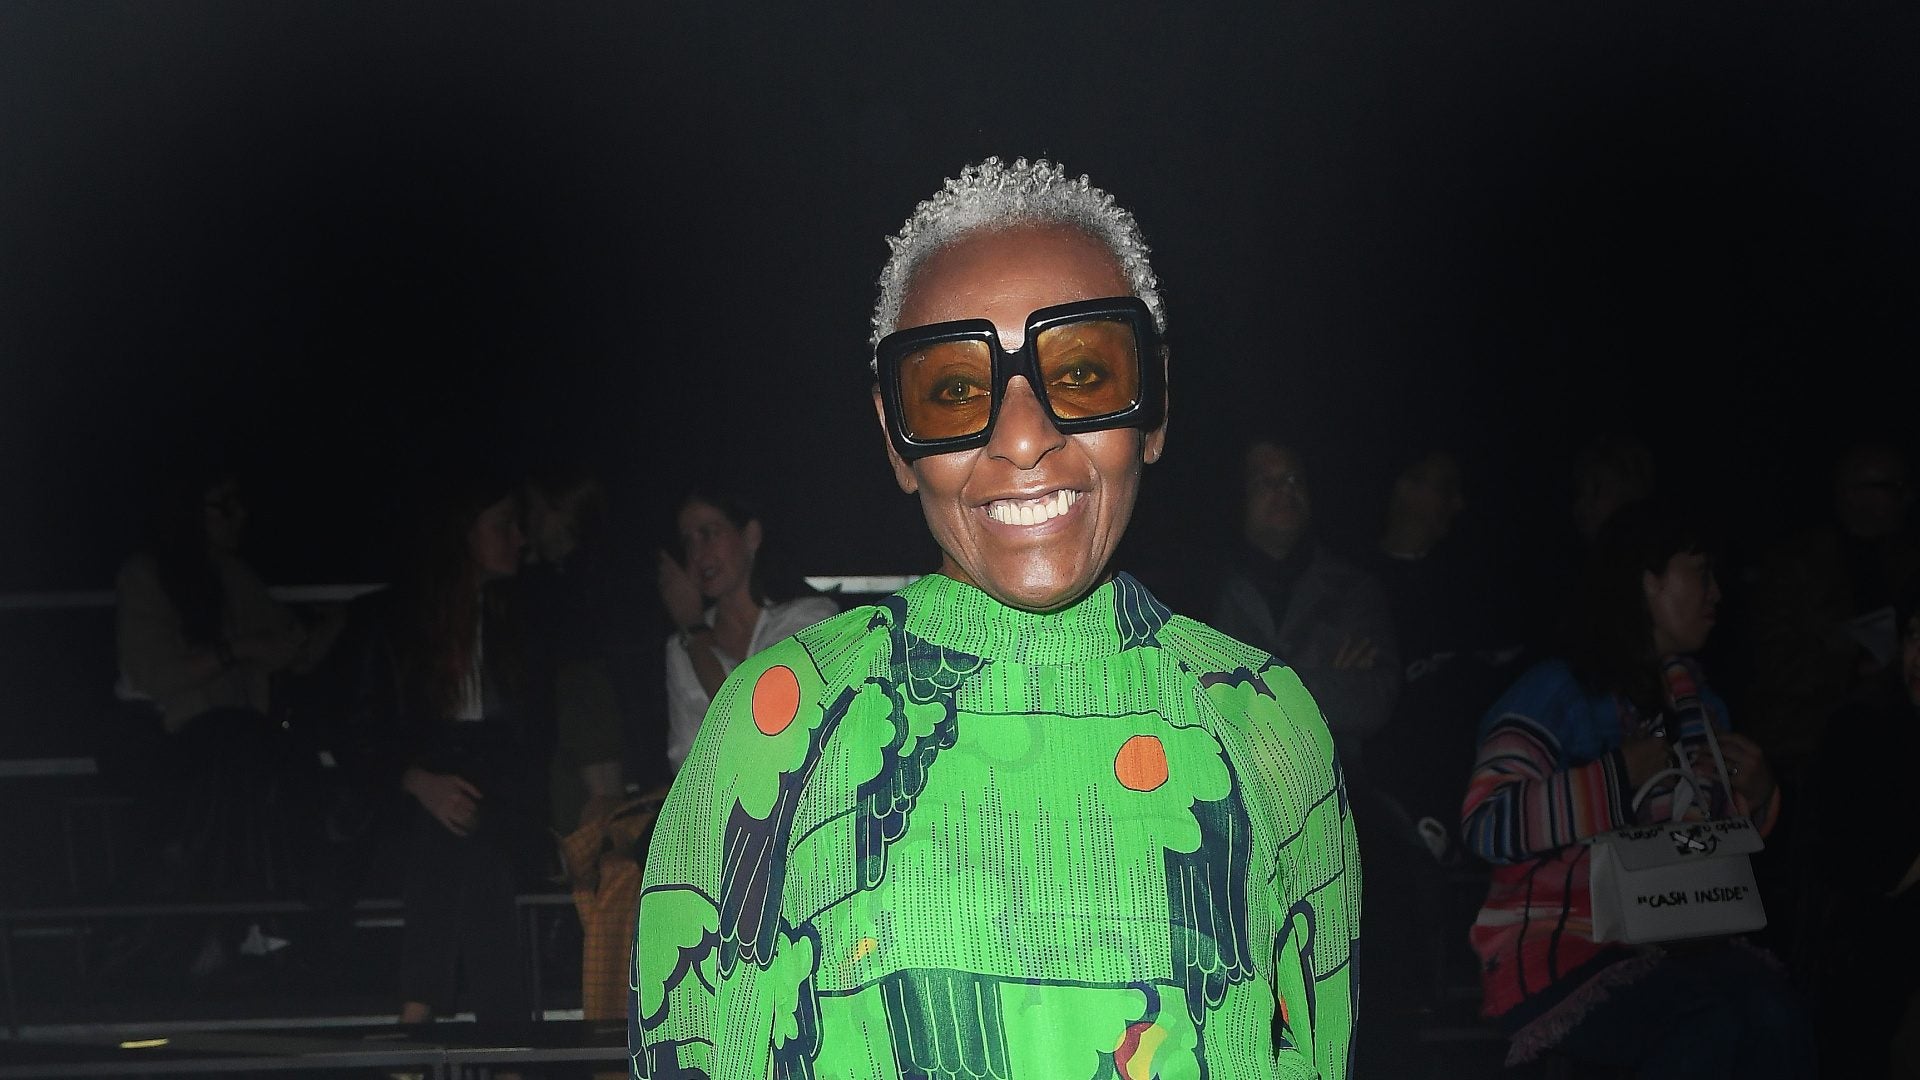 Bethann Hardison on The Brooklyn Circus X Gap, The Trajectory Of Fashion, And Her Advice For Fashion’s Brightest